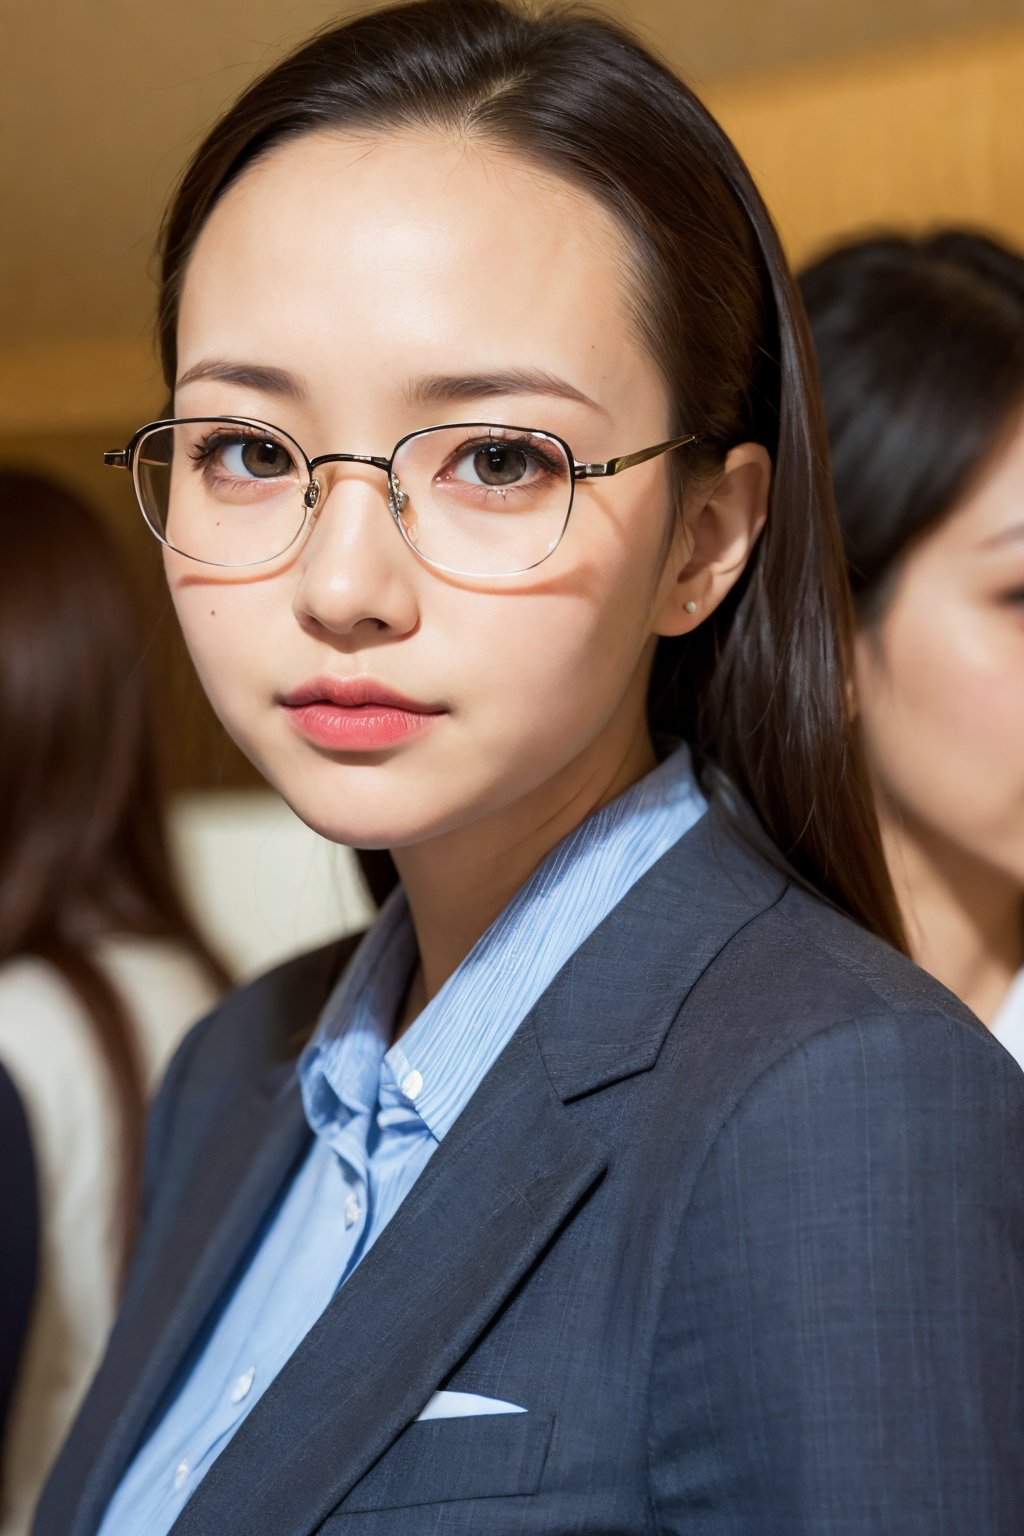 best quality, masterpiece, ultra high resolution, (photorealistic:1.4), RAW photo ,1girl, (portrait:0.8), (close-up:0.8)(cute,kawaii,:1.4)japanese,(suit:1.3)office lady, semi-rimless eyewear,(40yo:1.3),BREAKbrown_eyes, black_hair, straight hair, lips, (forehead:1.3), plump,petite,large breasts,  (focus face:1.3),